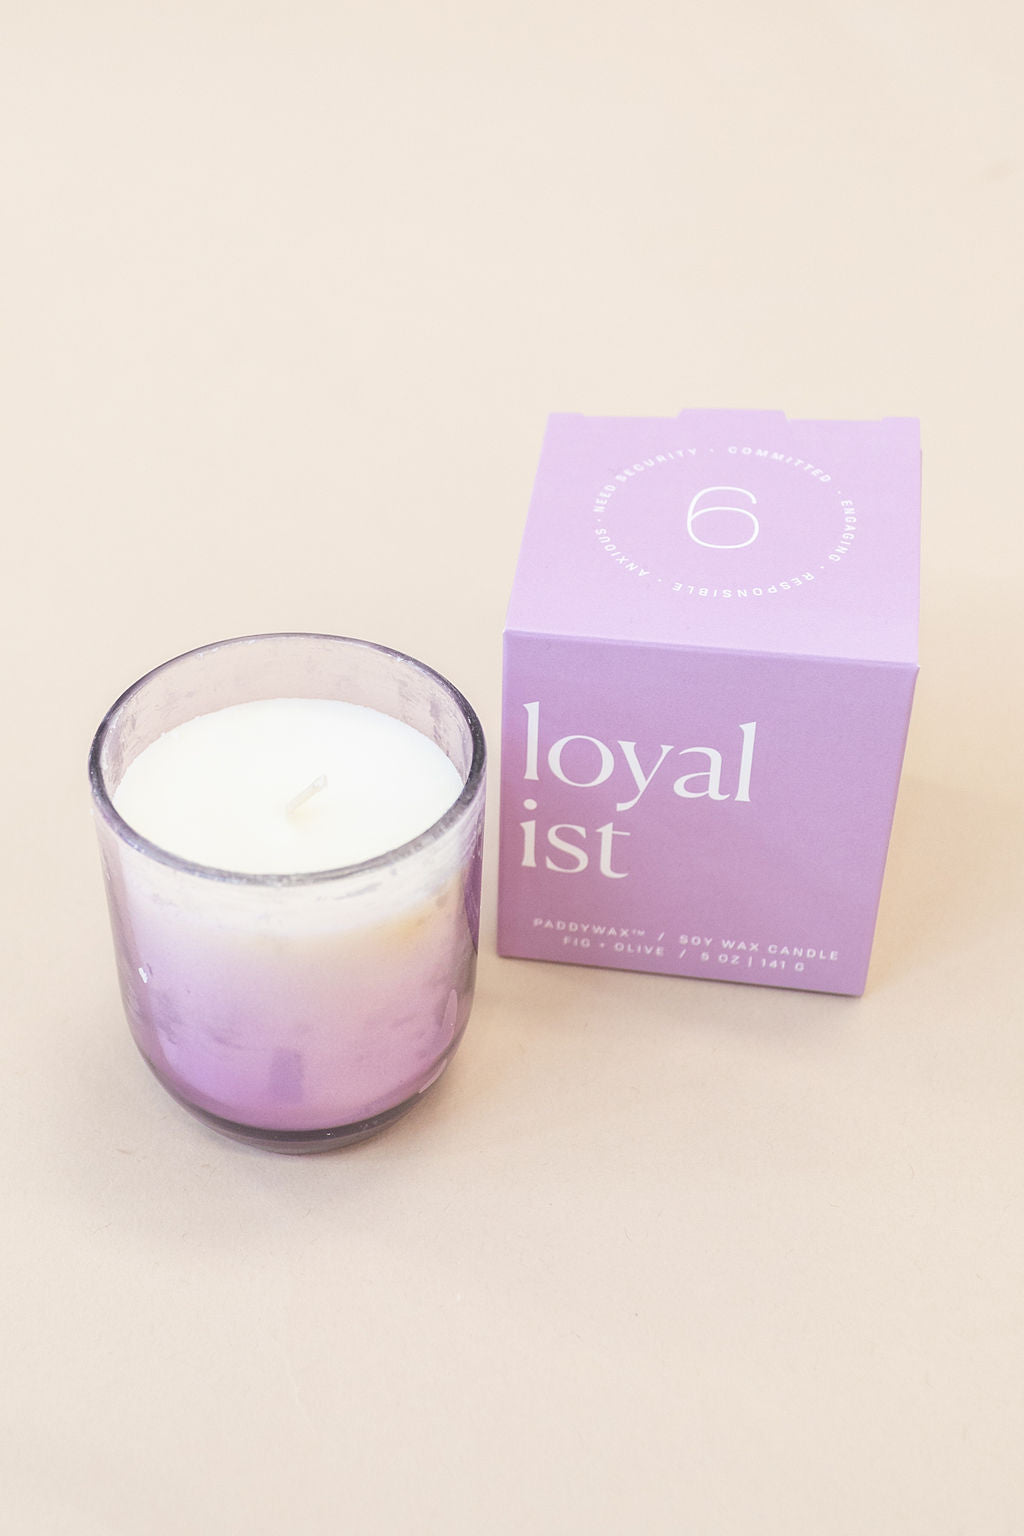 Paddywax | Enneagram Candle | The Loyalist - Poppy and Stella